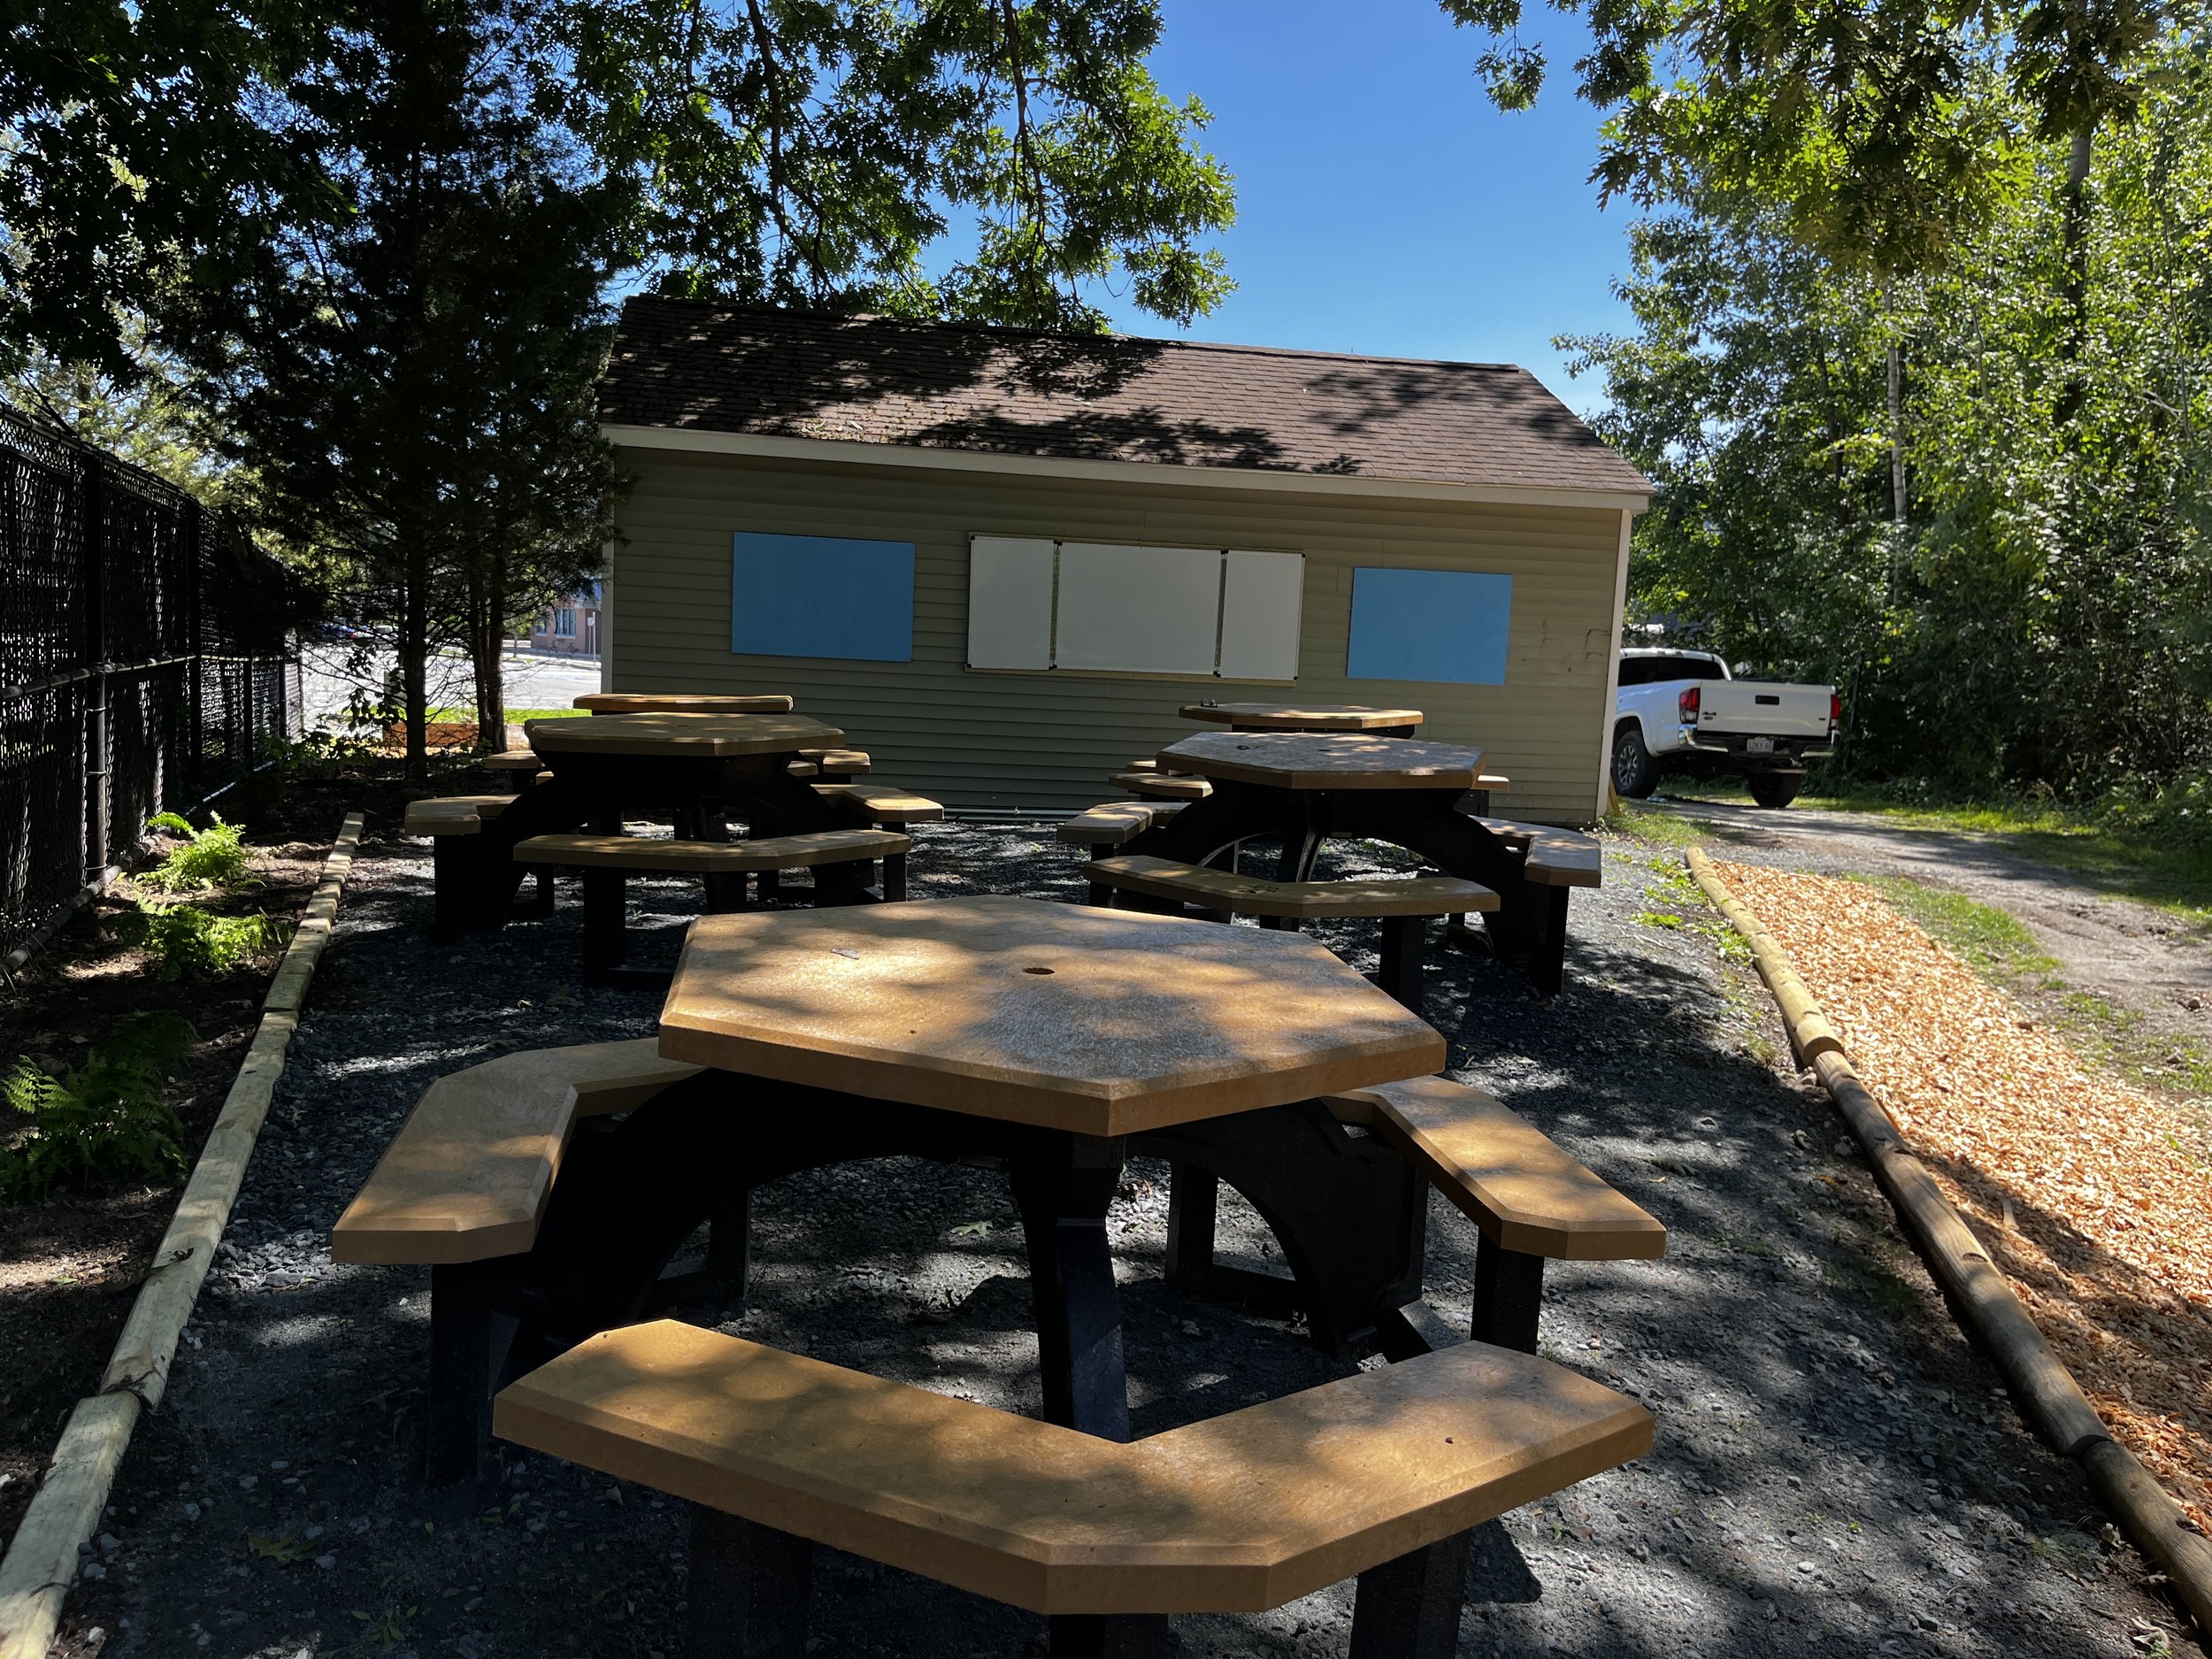 Picnic table area at the George School outdoor clasroom